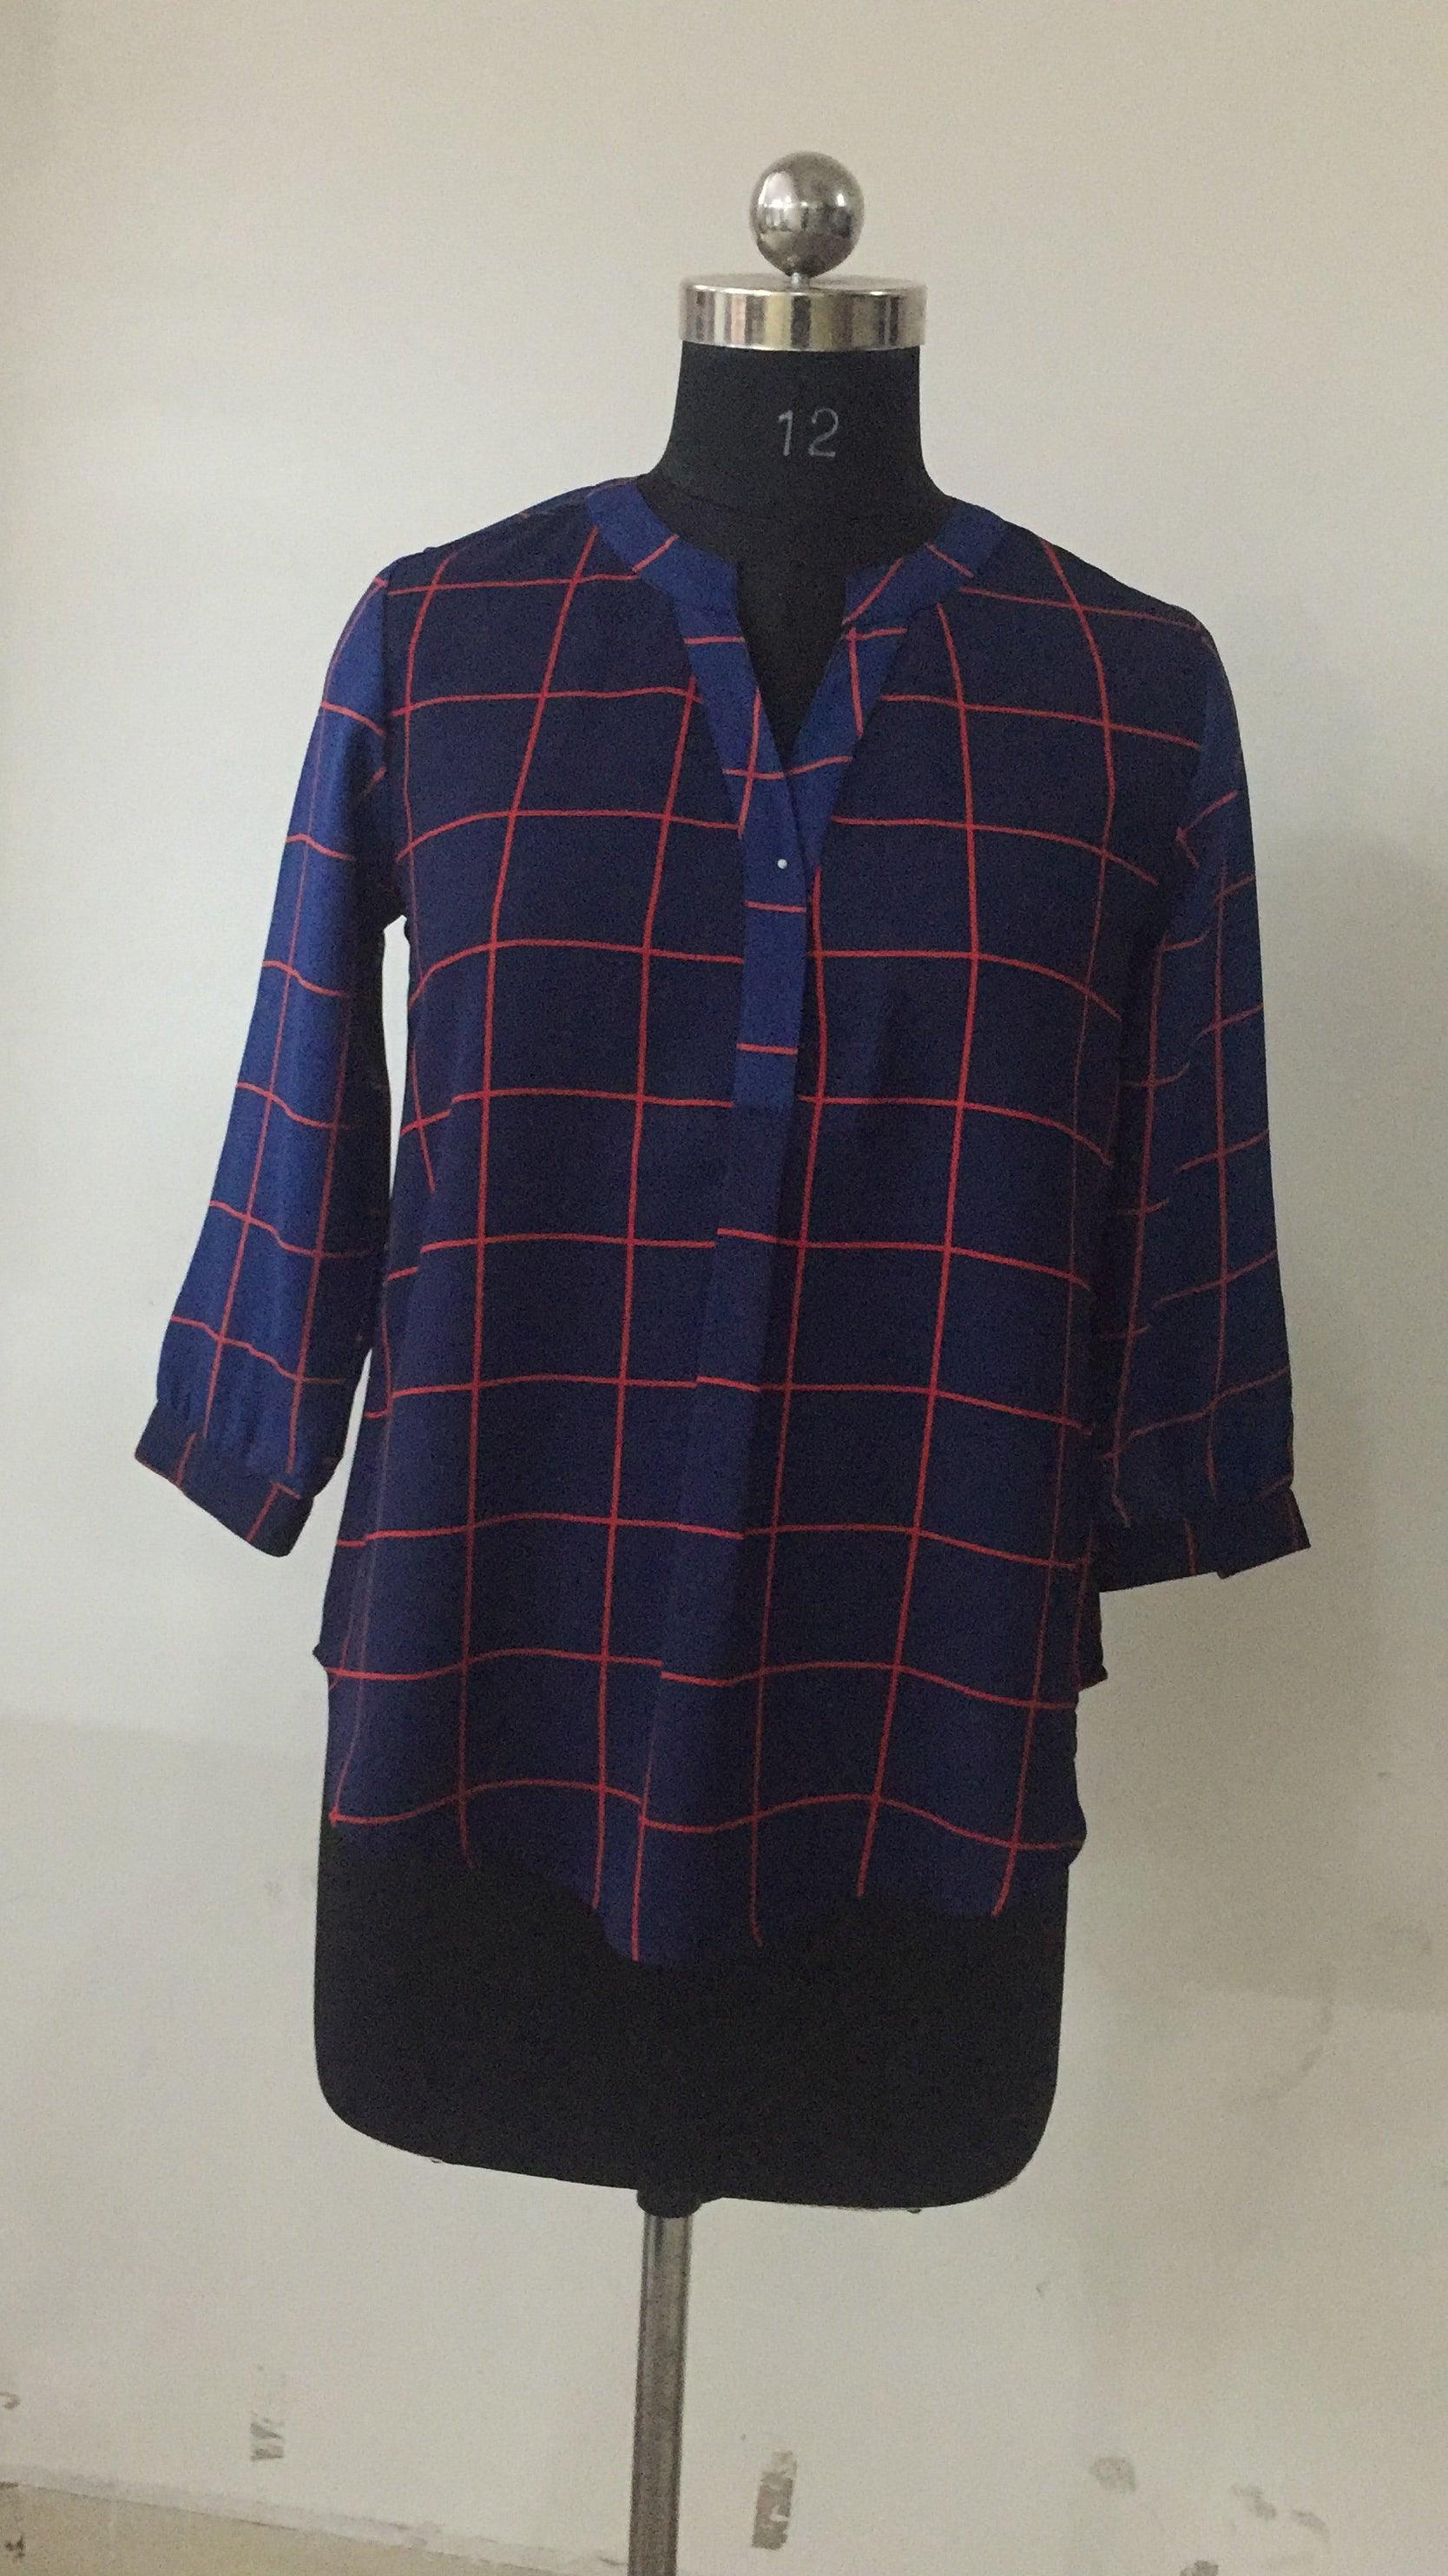 Qurvii Navy and red check tunic - Qurvii India